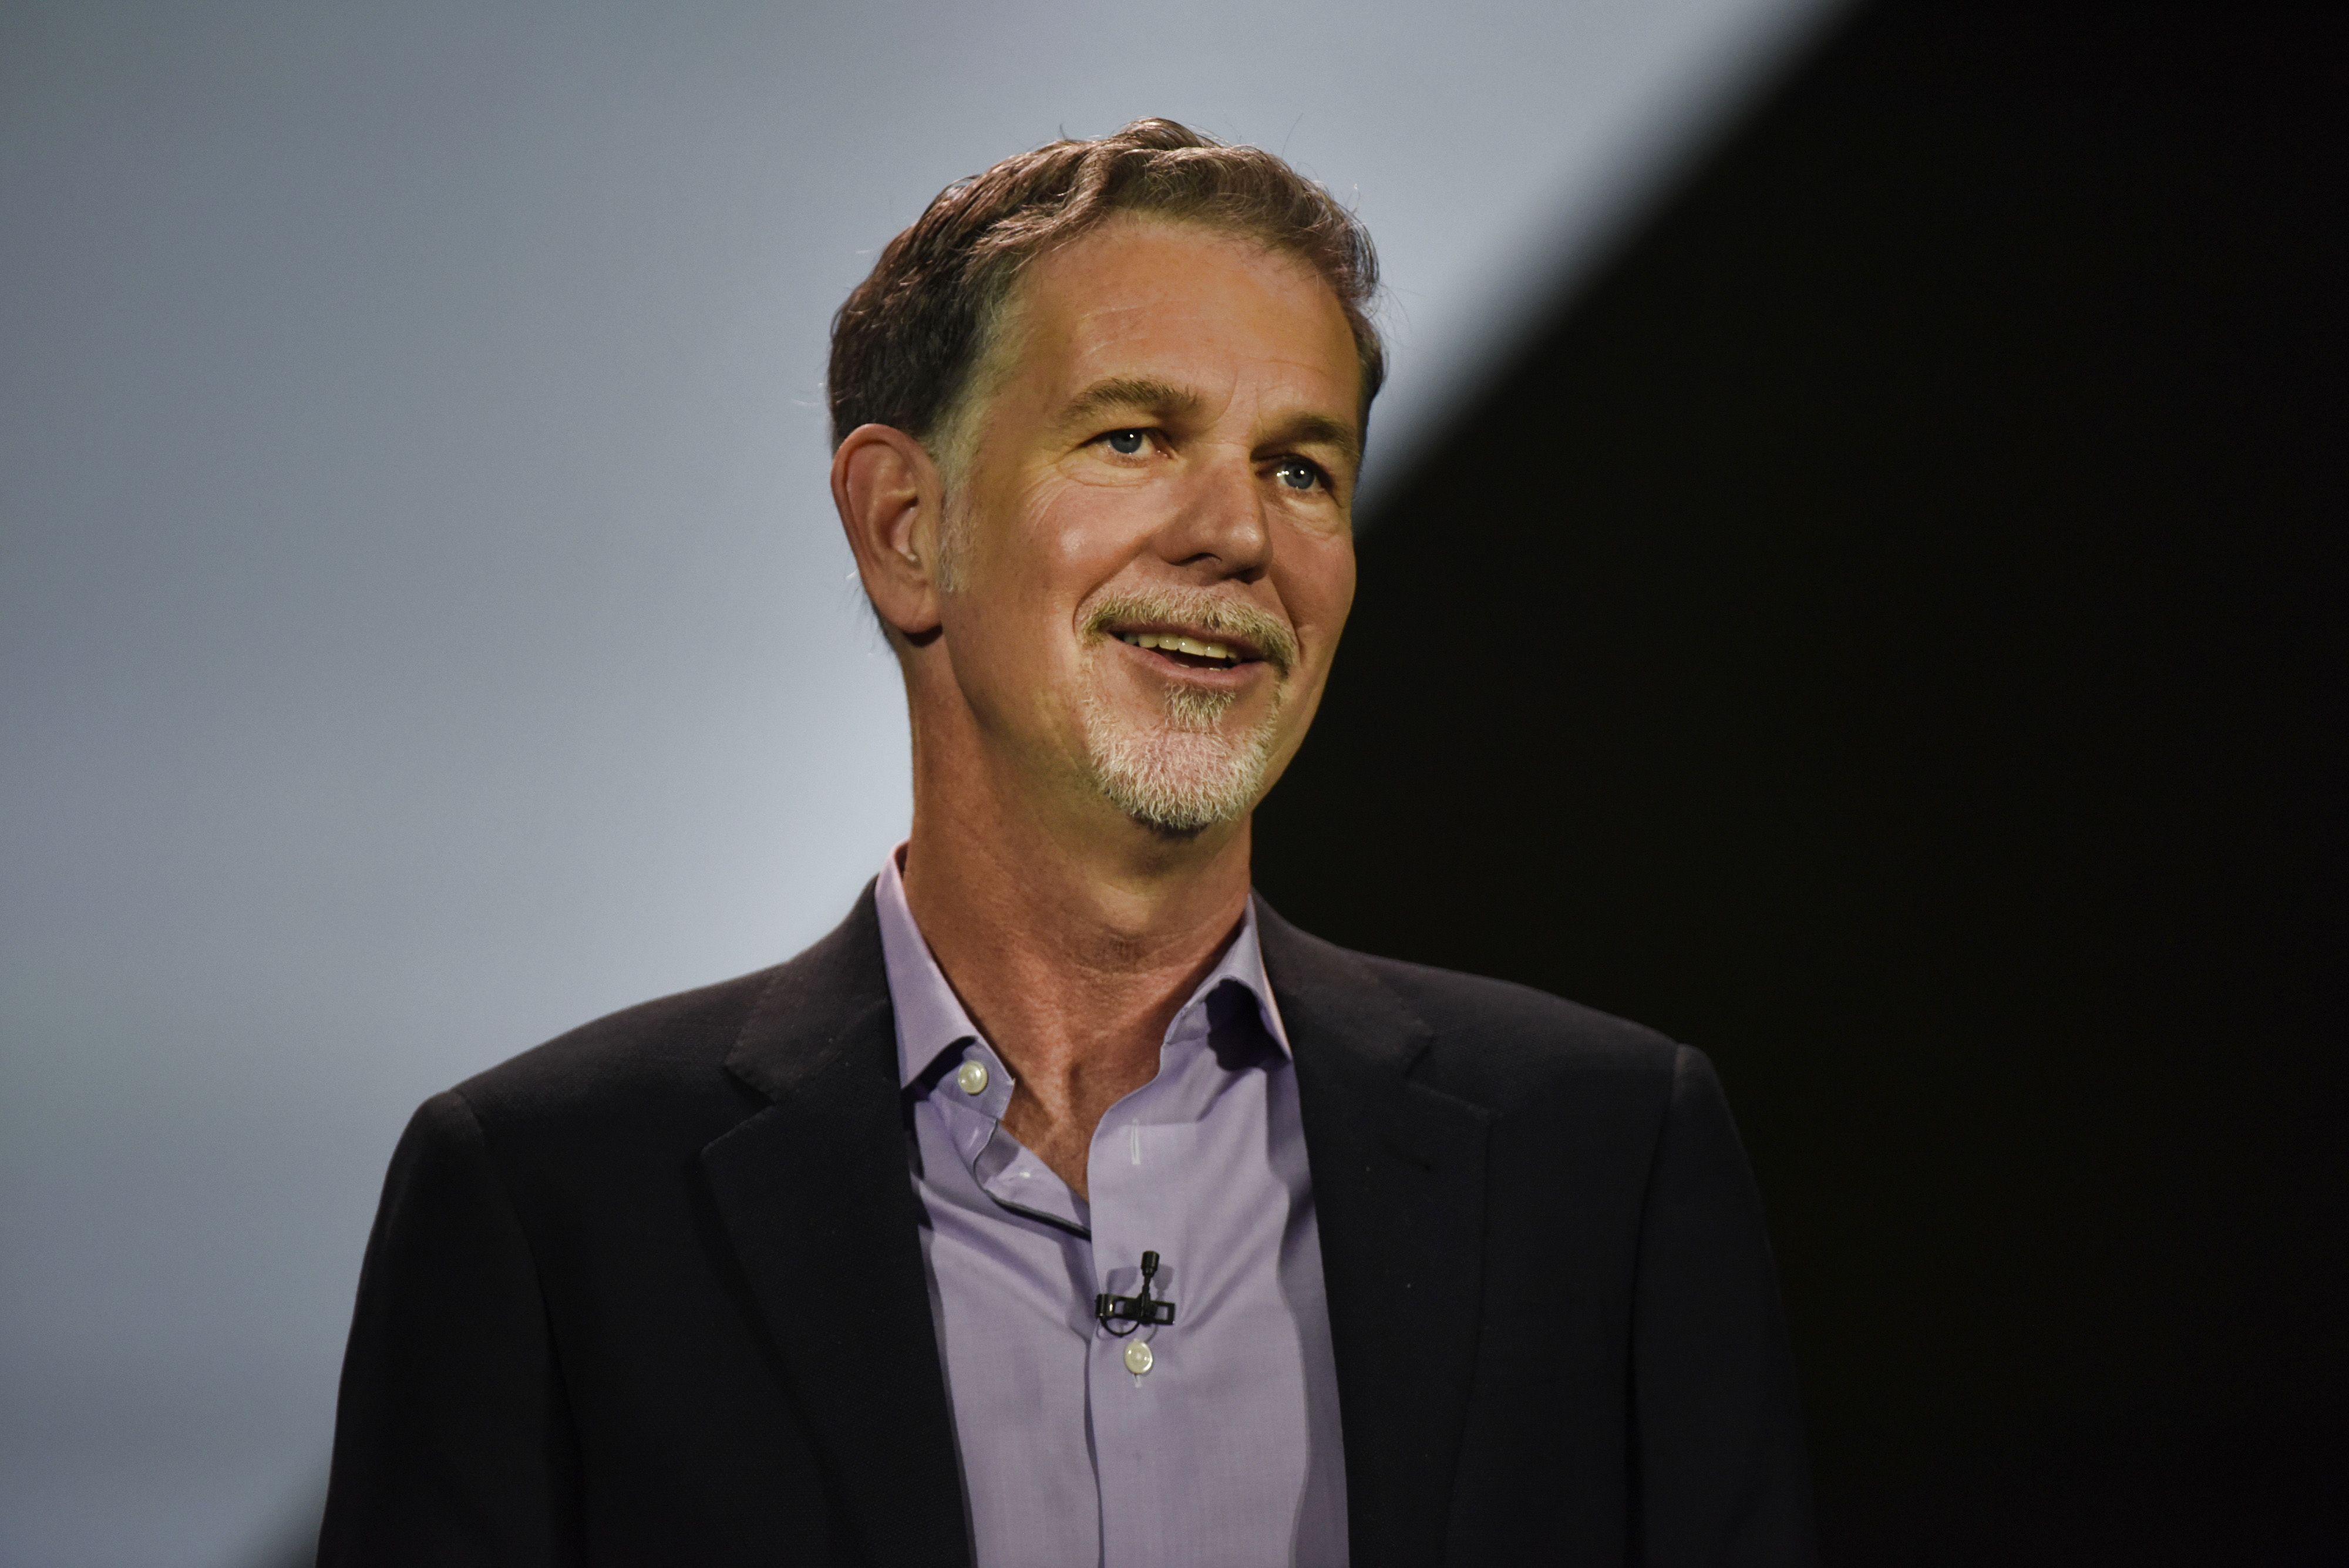 Netflix will weather onslaught of new streaming services, says Goldman